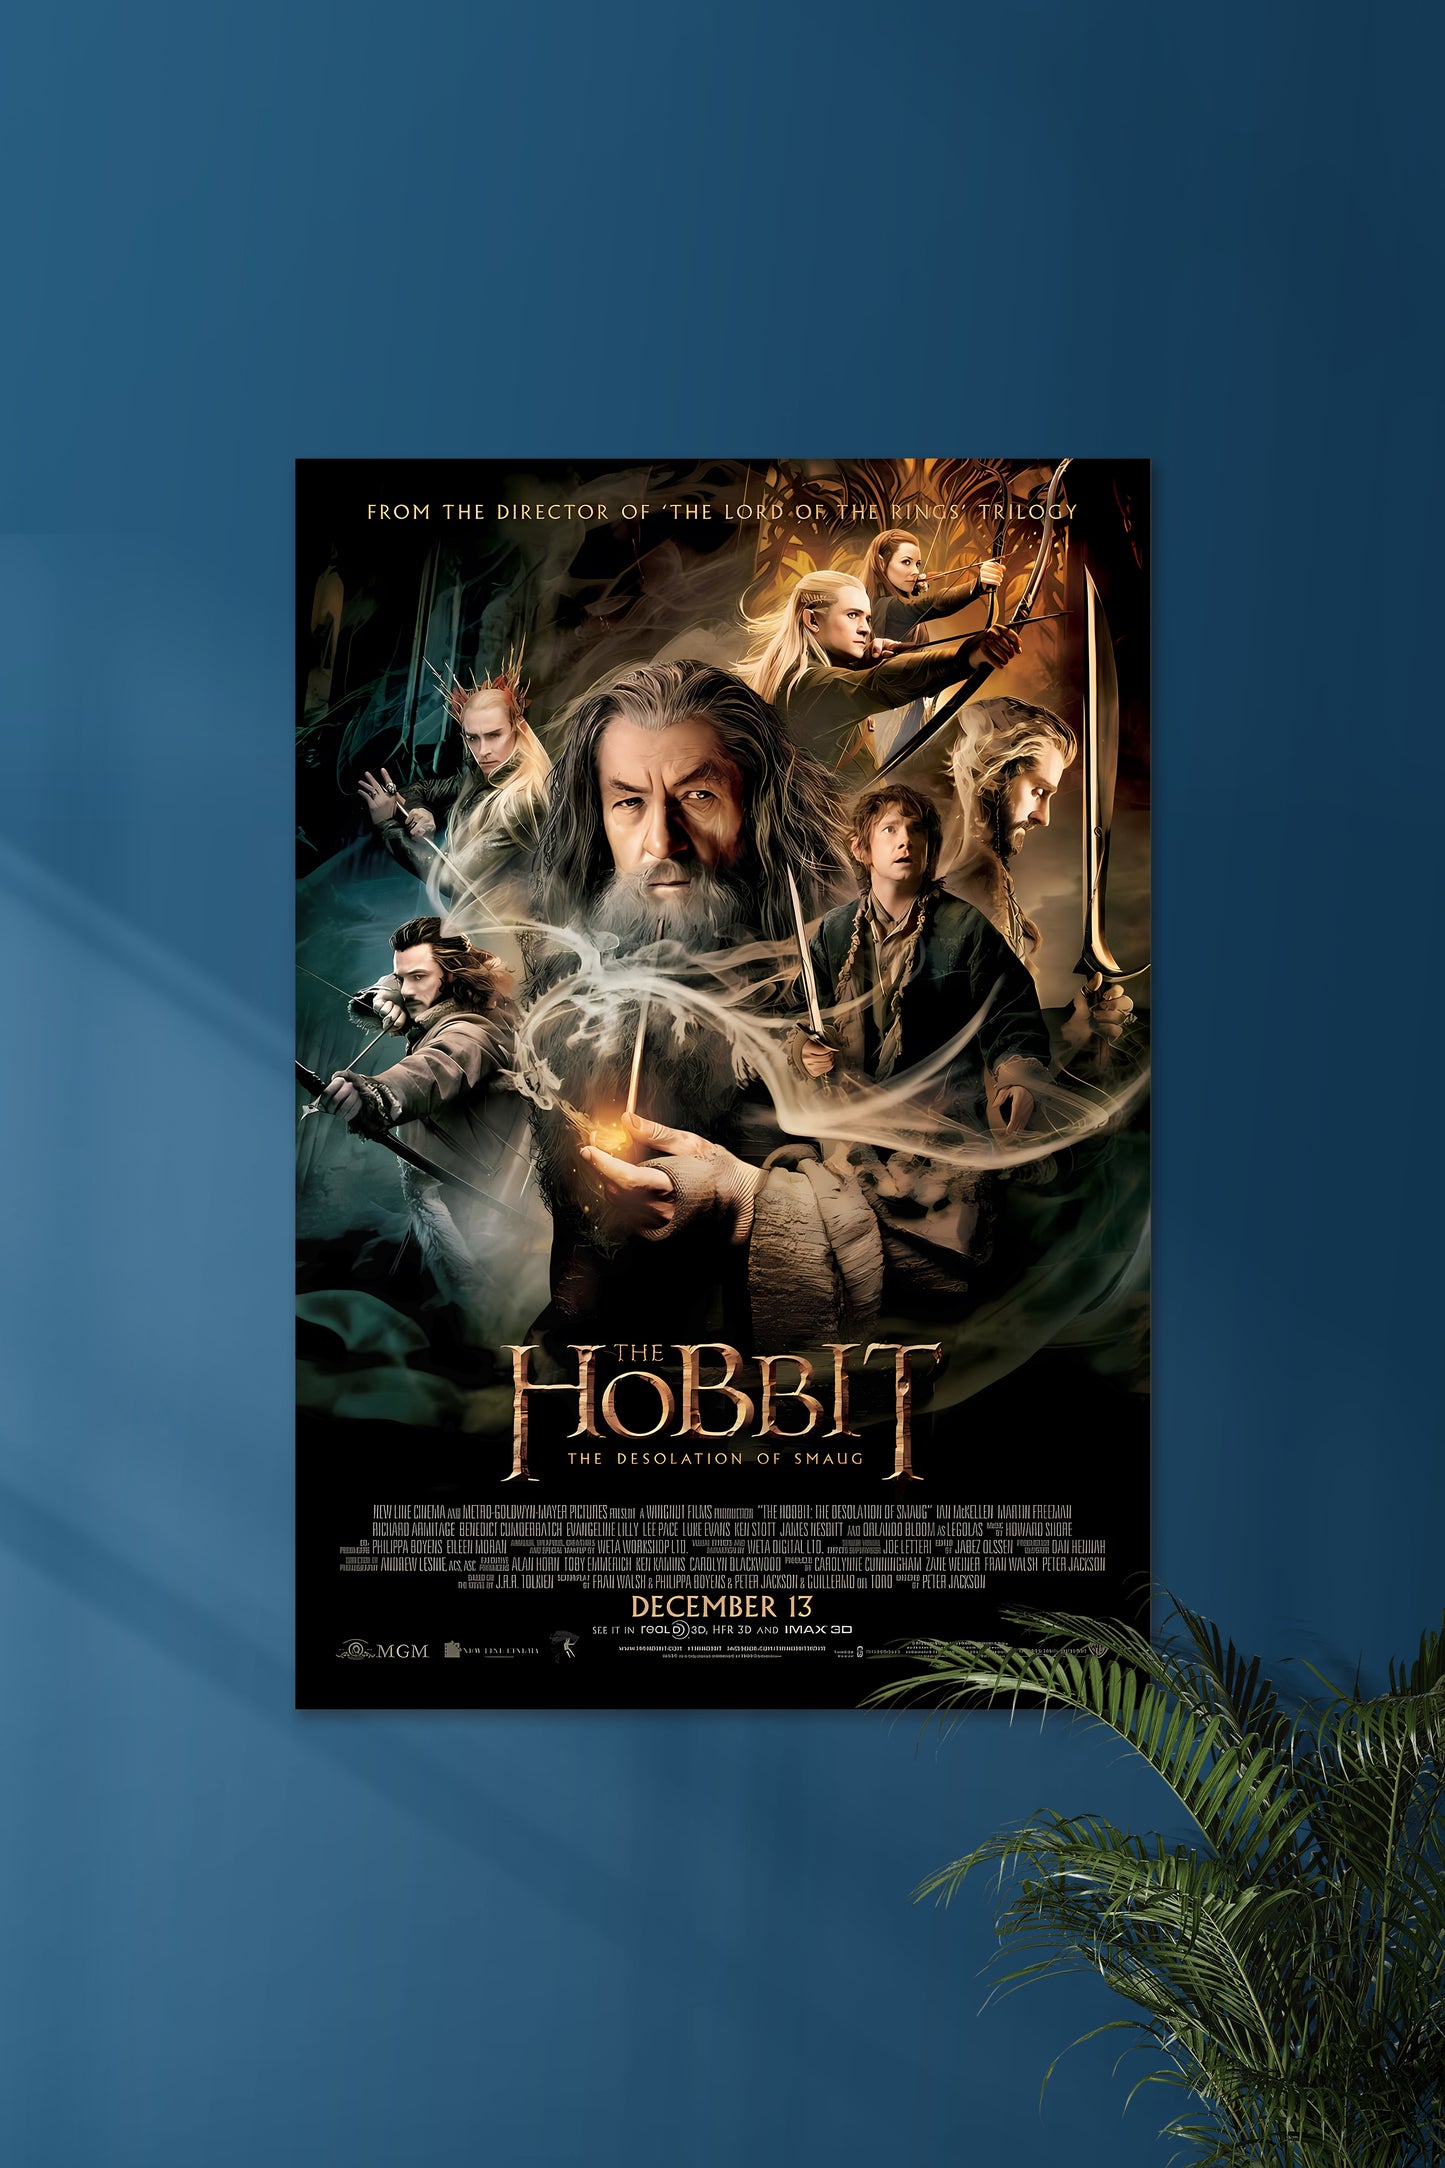 The Desolation of Smaug | The Hobbit | Movie Poster